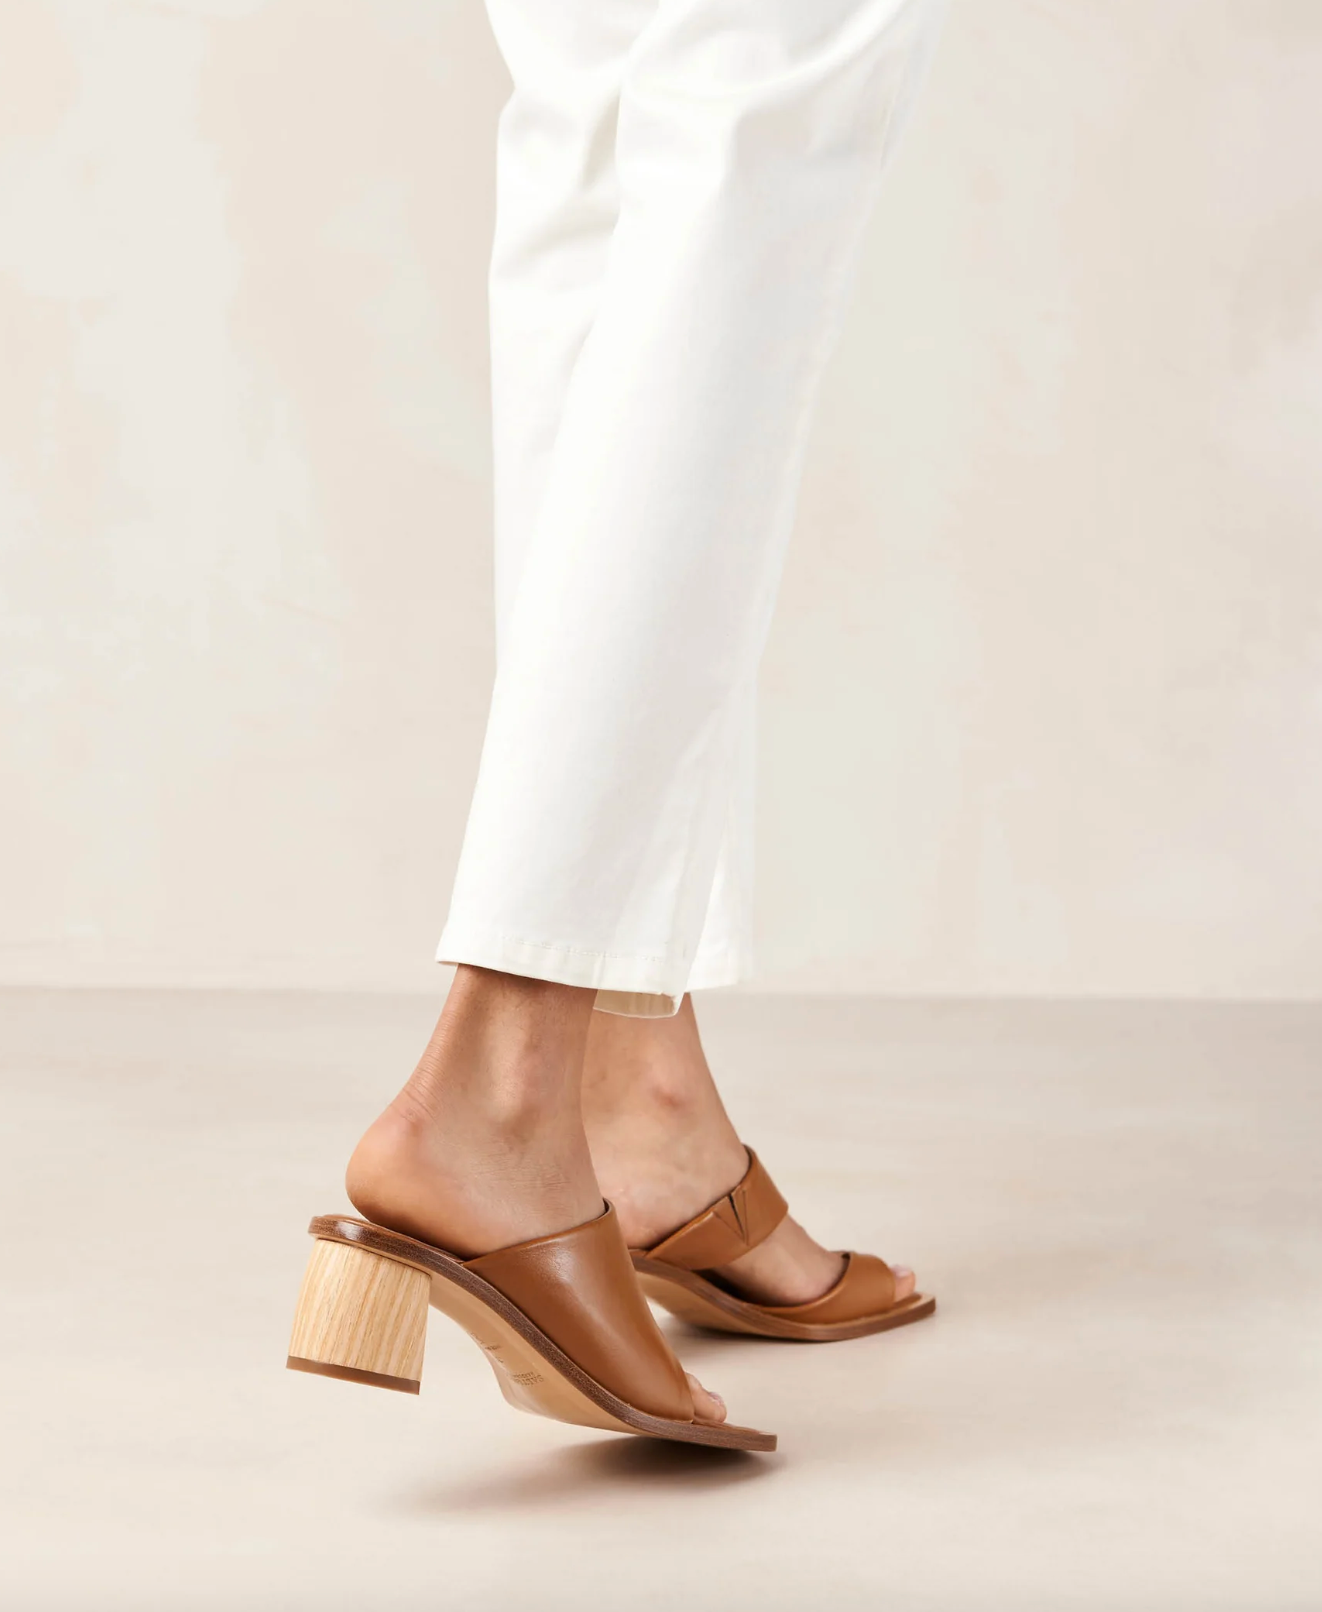 With only a toe ring and front strap, the Josie sandals slip on with ease like a mule. Crafted from brown leather, they have wood-style block heels as well as padded insoles for cushioning and comfort.  Sustainably made in Portugal, designed in Barcelona.